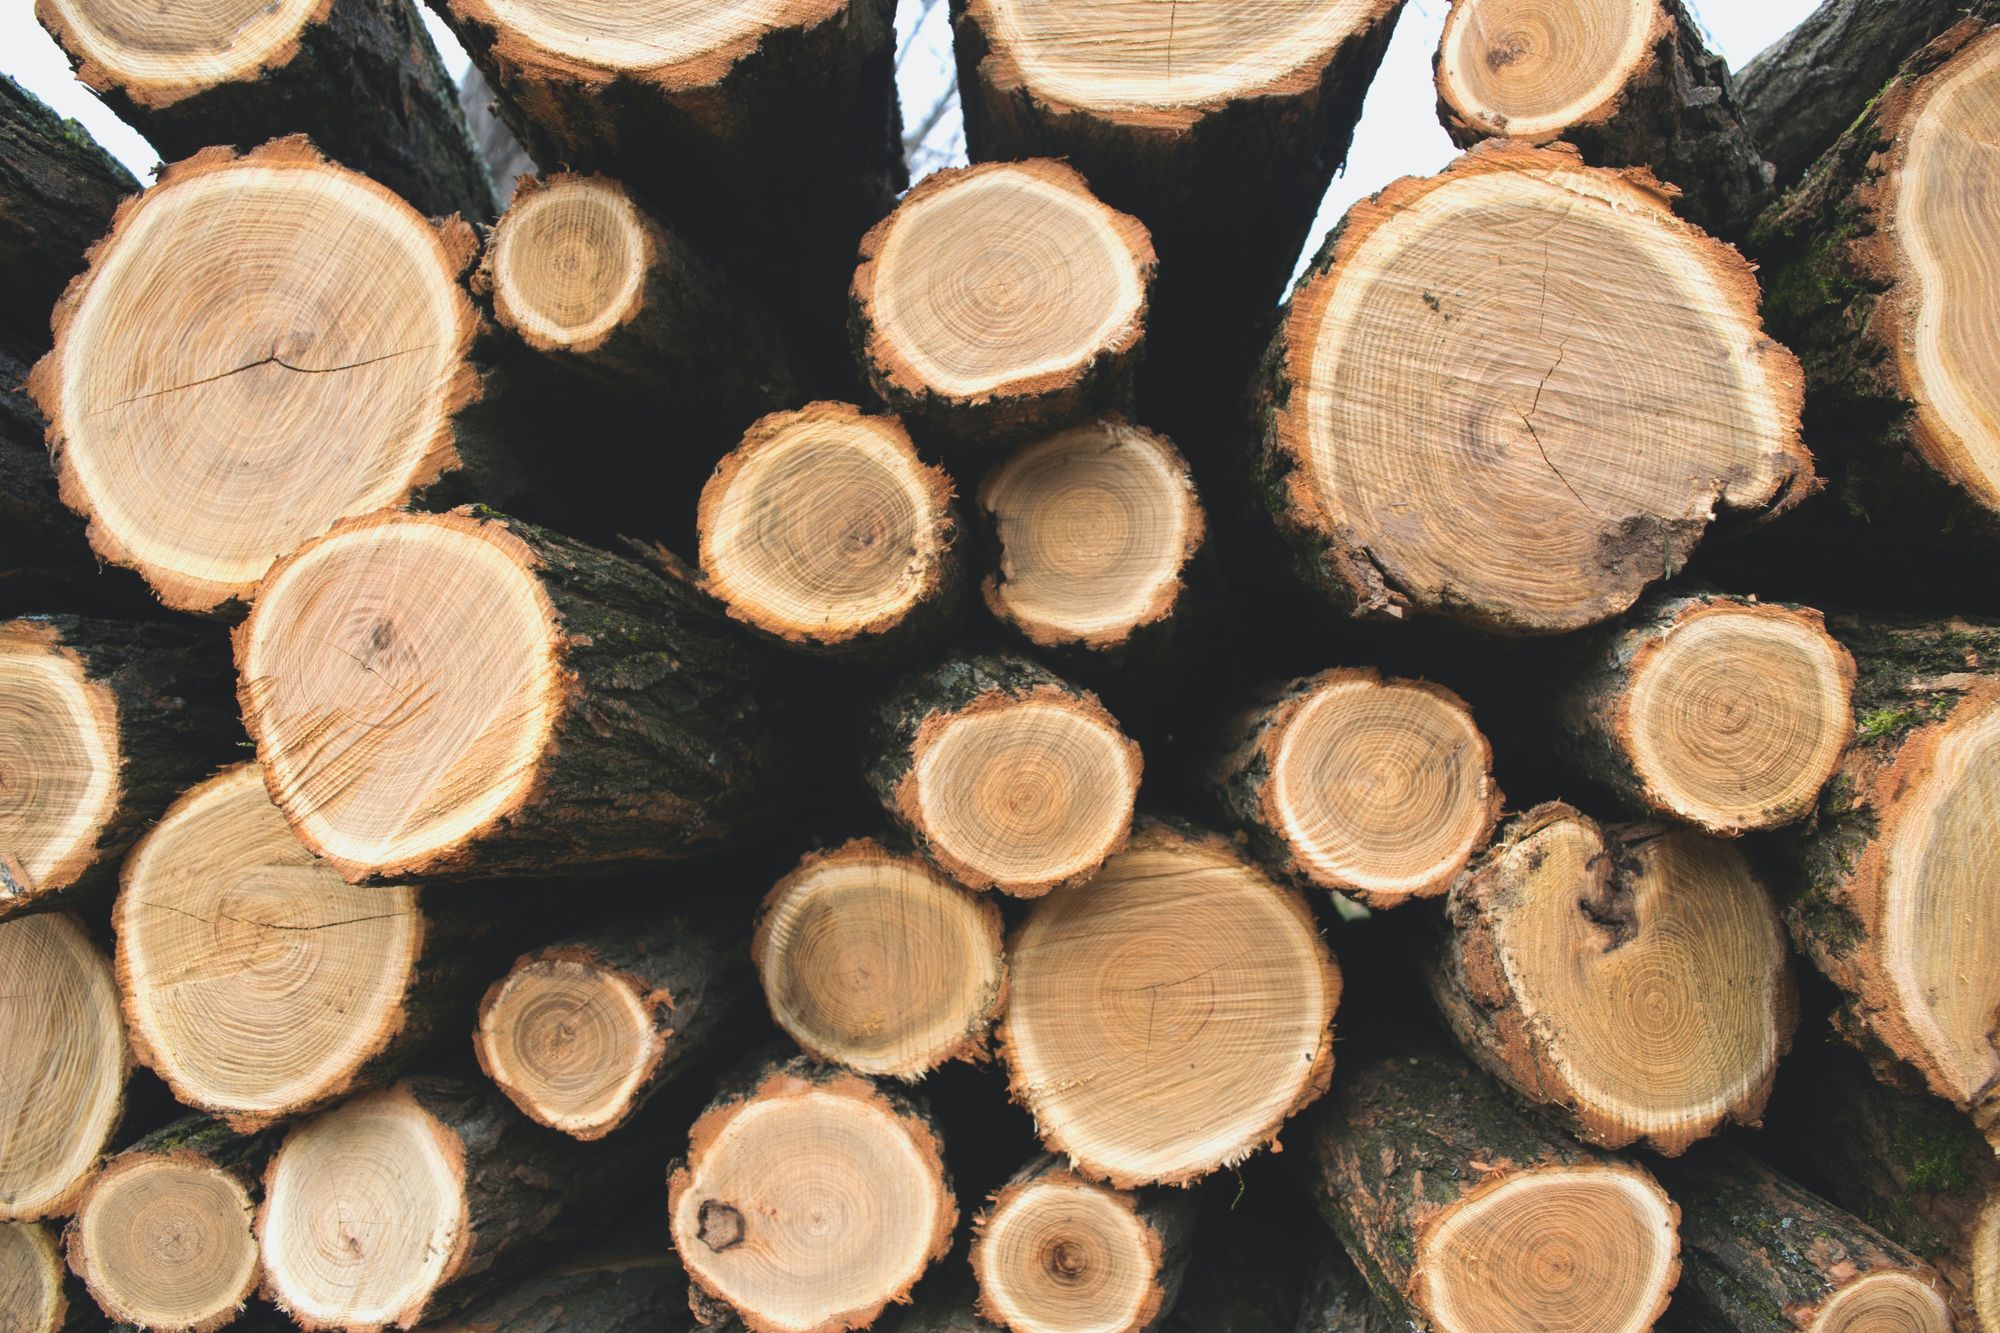 Utilizing the Best Practices for Safe and Sustainable Wood Production 